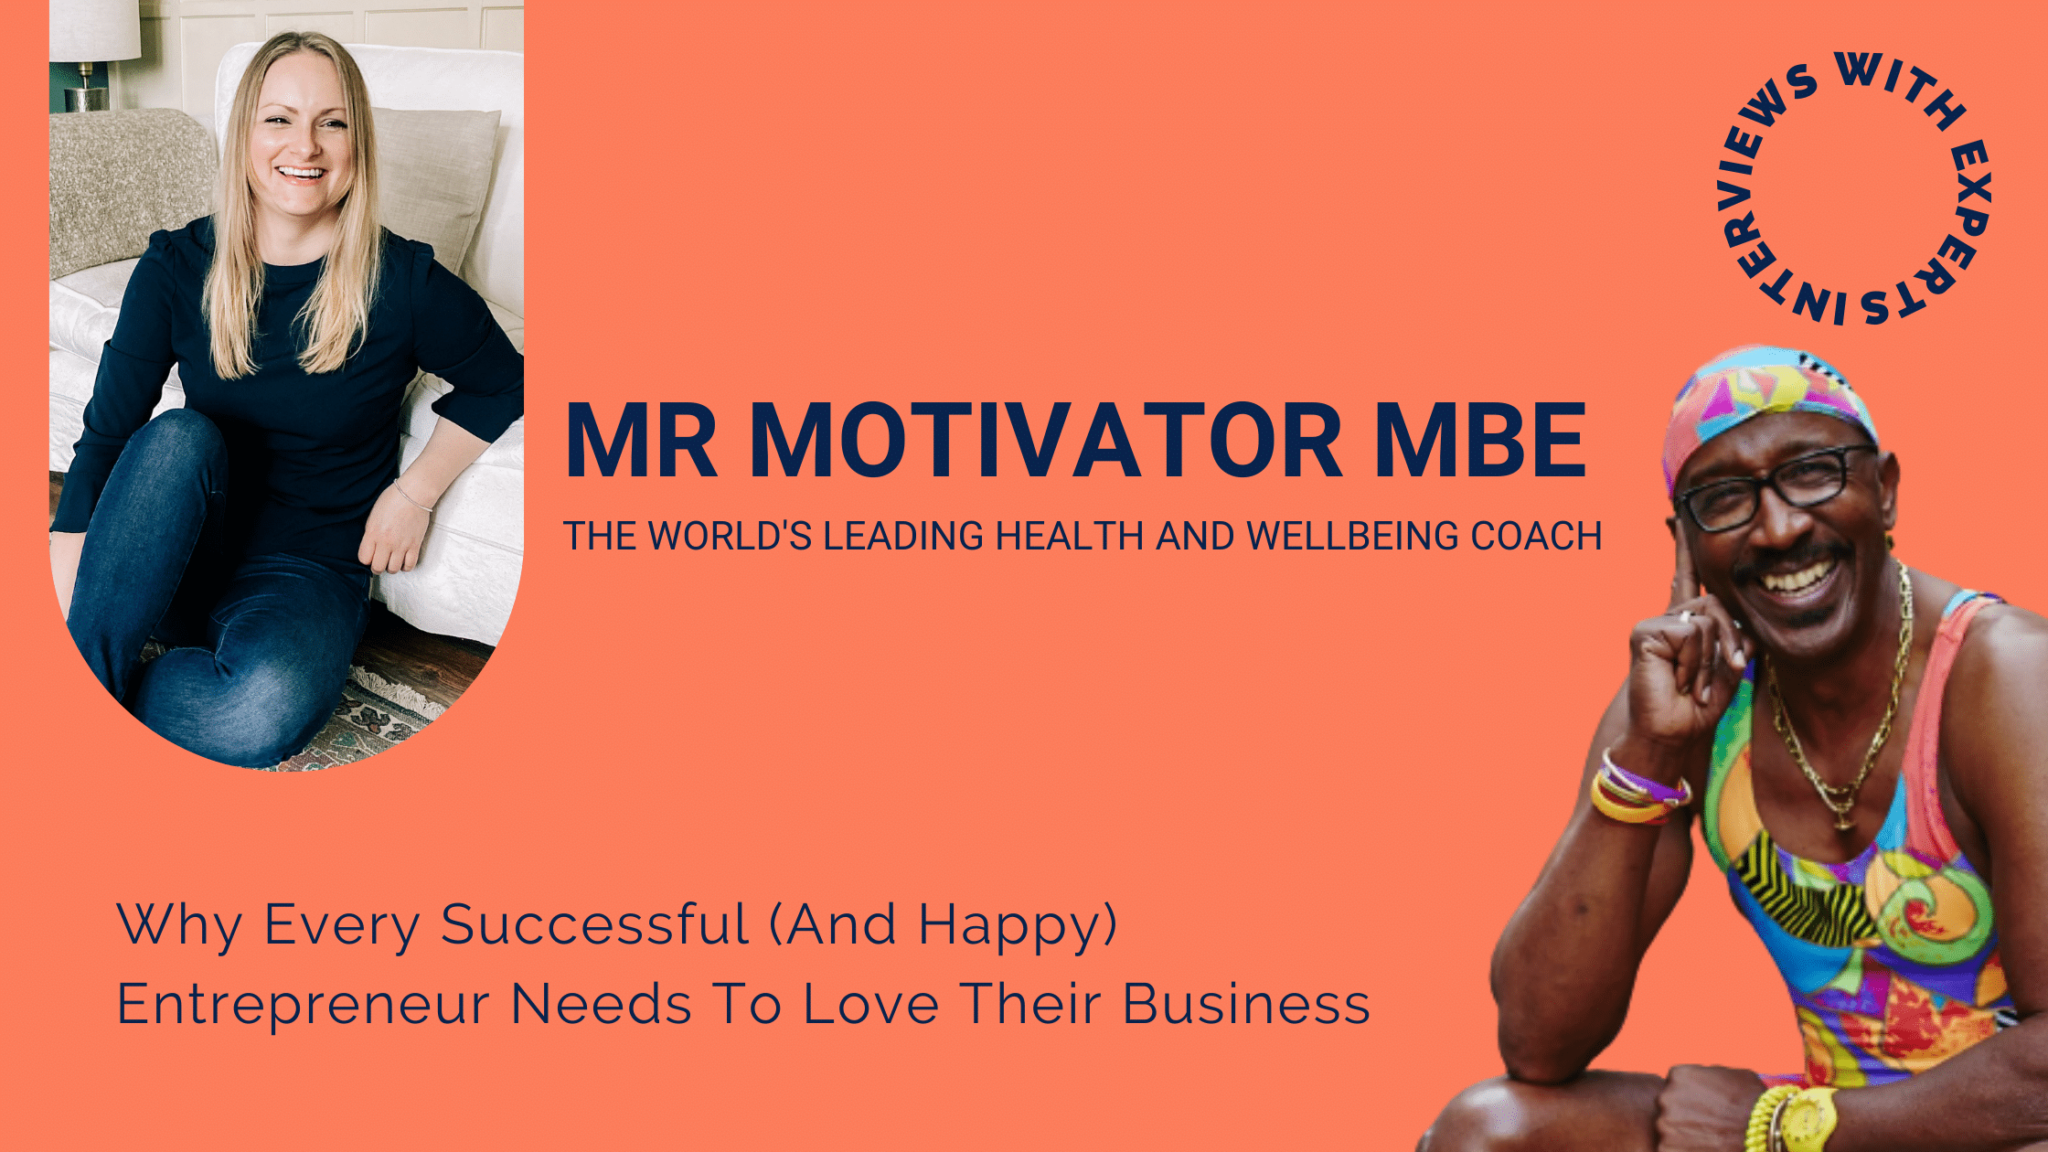 Why Every Successful (And Happy) Entrepreneur Needs To Love Their Business By Georgia Kirke With Special Guest Derrick Errol Evans, AKA “Mr Motivator” MBE